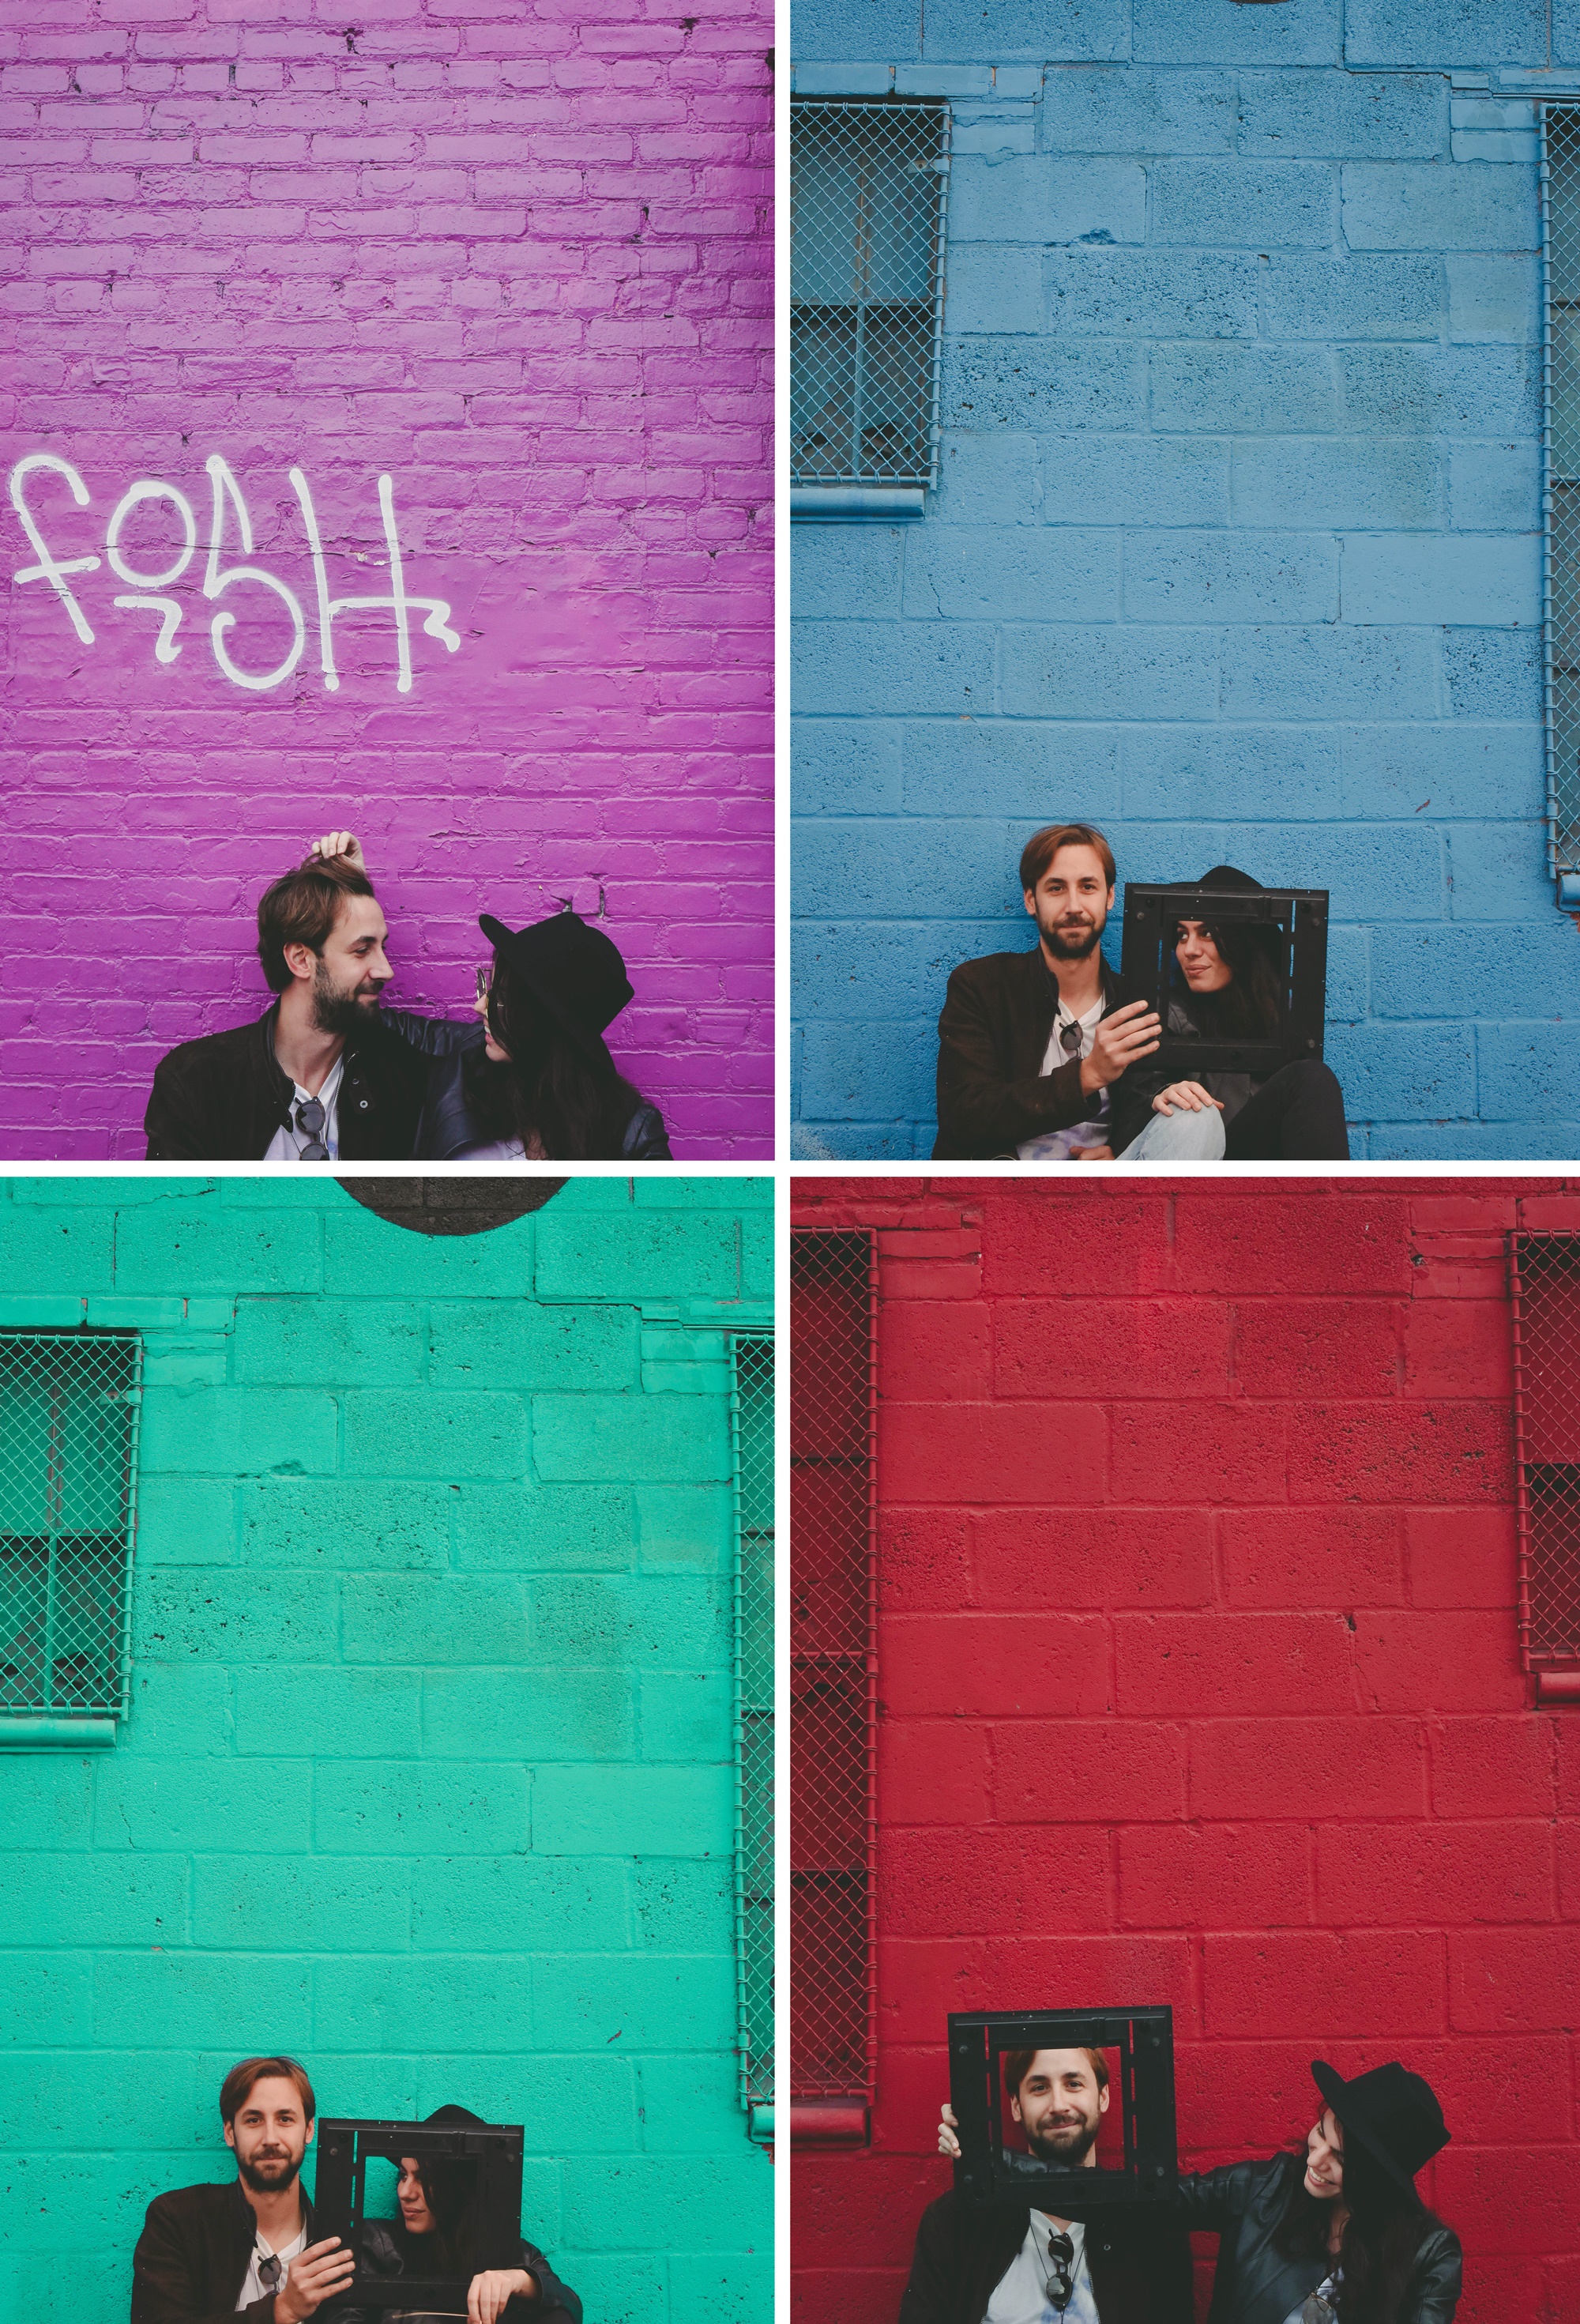 An engagement session in New York